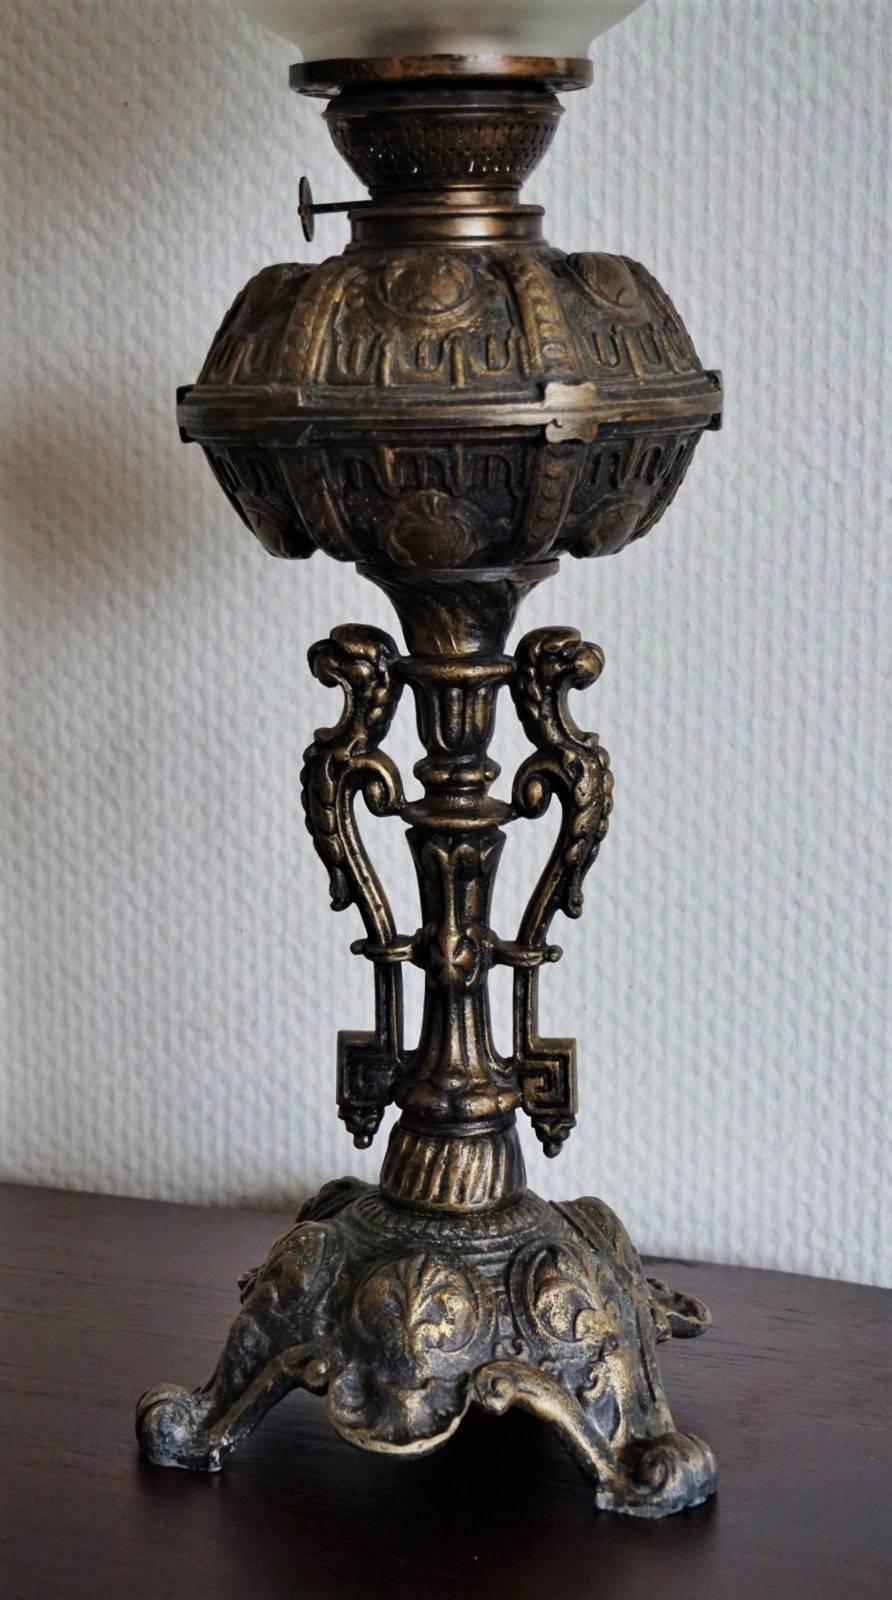 Large heavy cast bronze oil lamp converted to electric table lamp, richly ornate raised on column with three dragons. Etched glass globe and glass chimney, circa 1880-1890.

Very good condition, no chips or cracks, bronze with sighs of use and